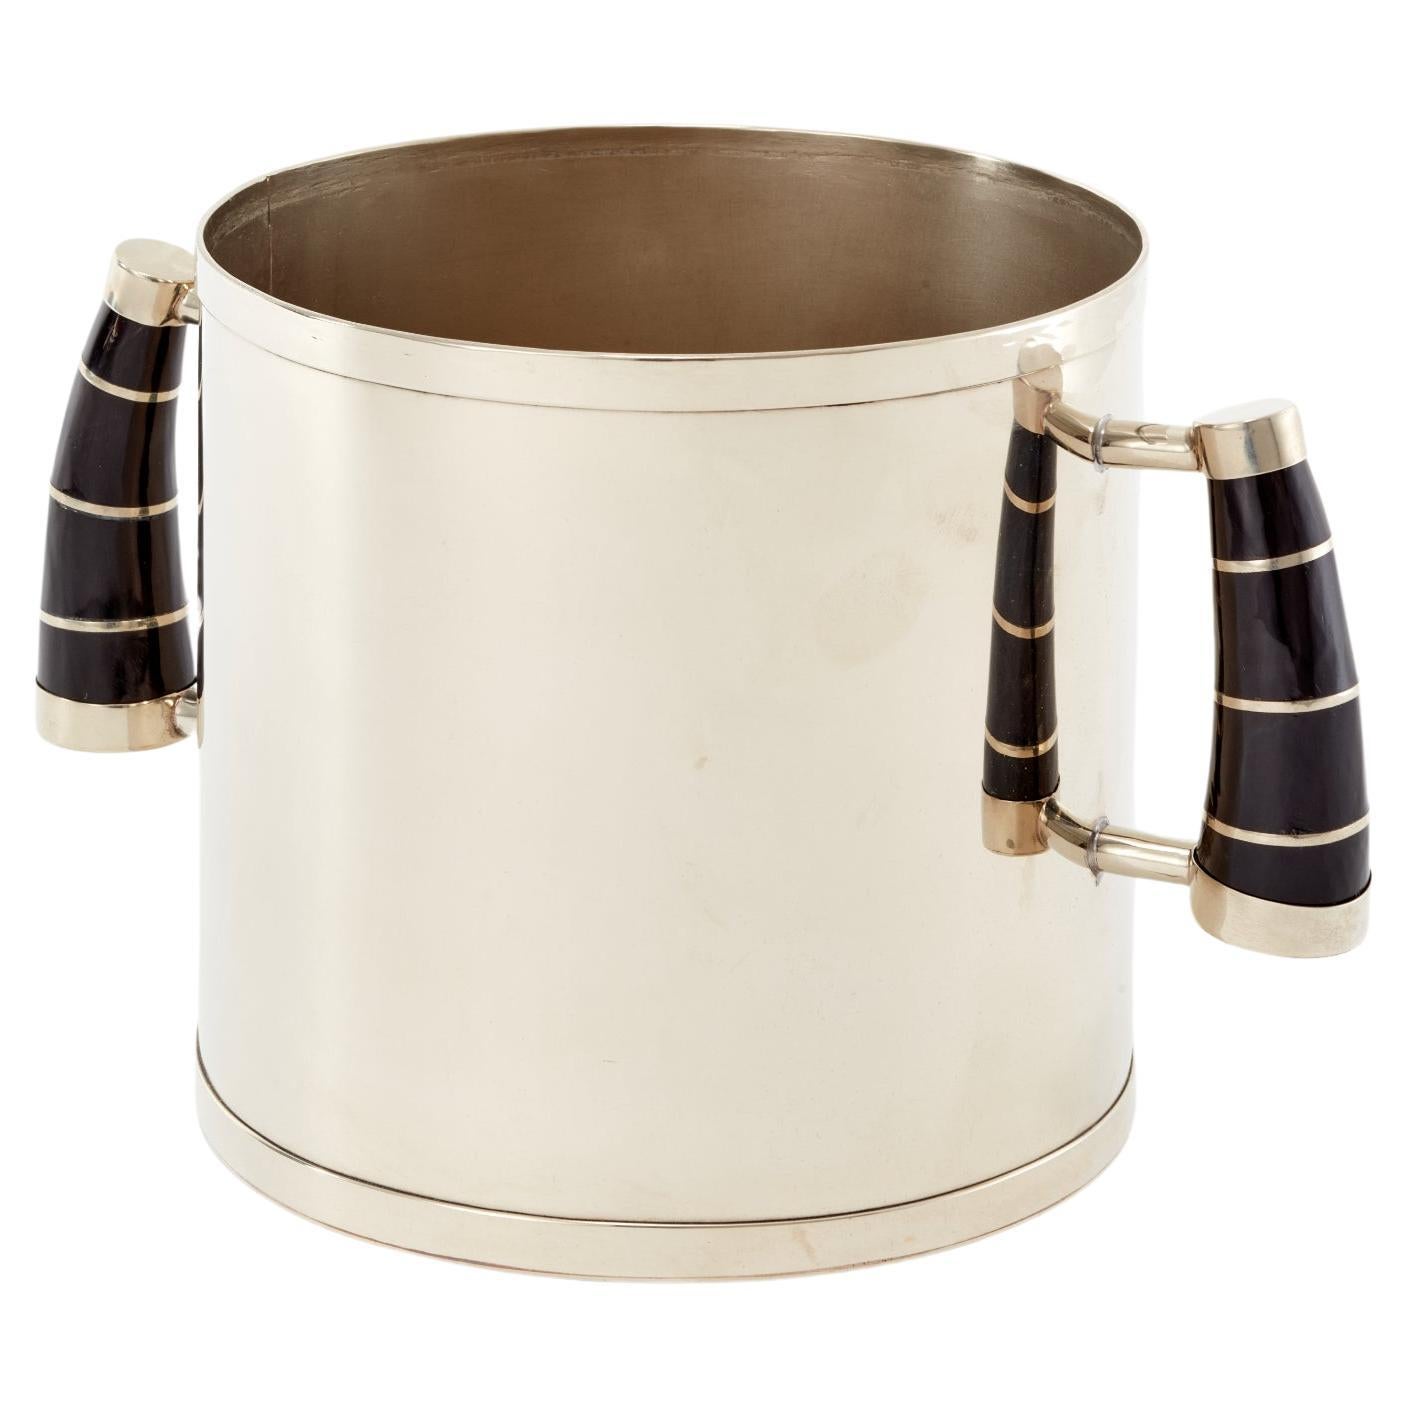 Chubut Champagne Bucket, Alpaca Silver & Black Horn For Sale